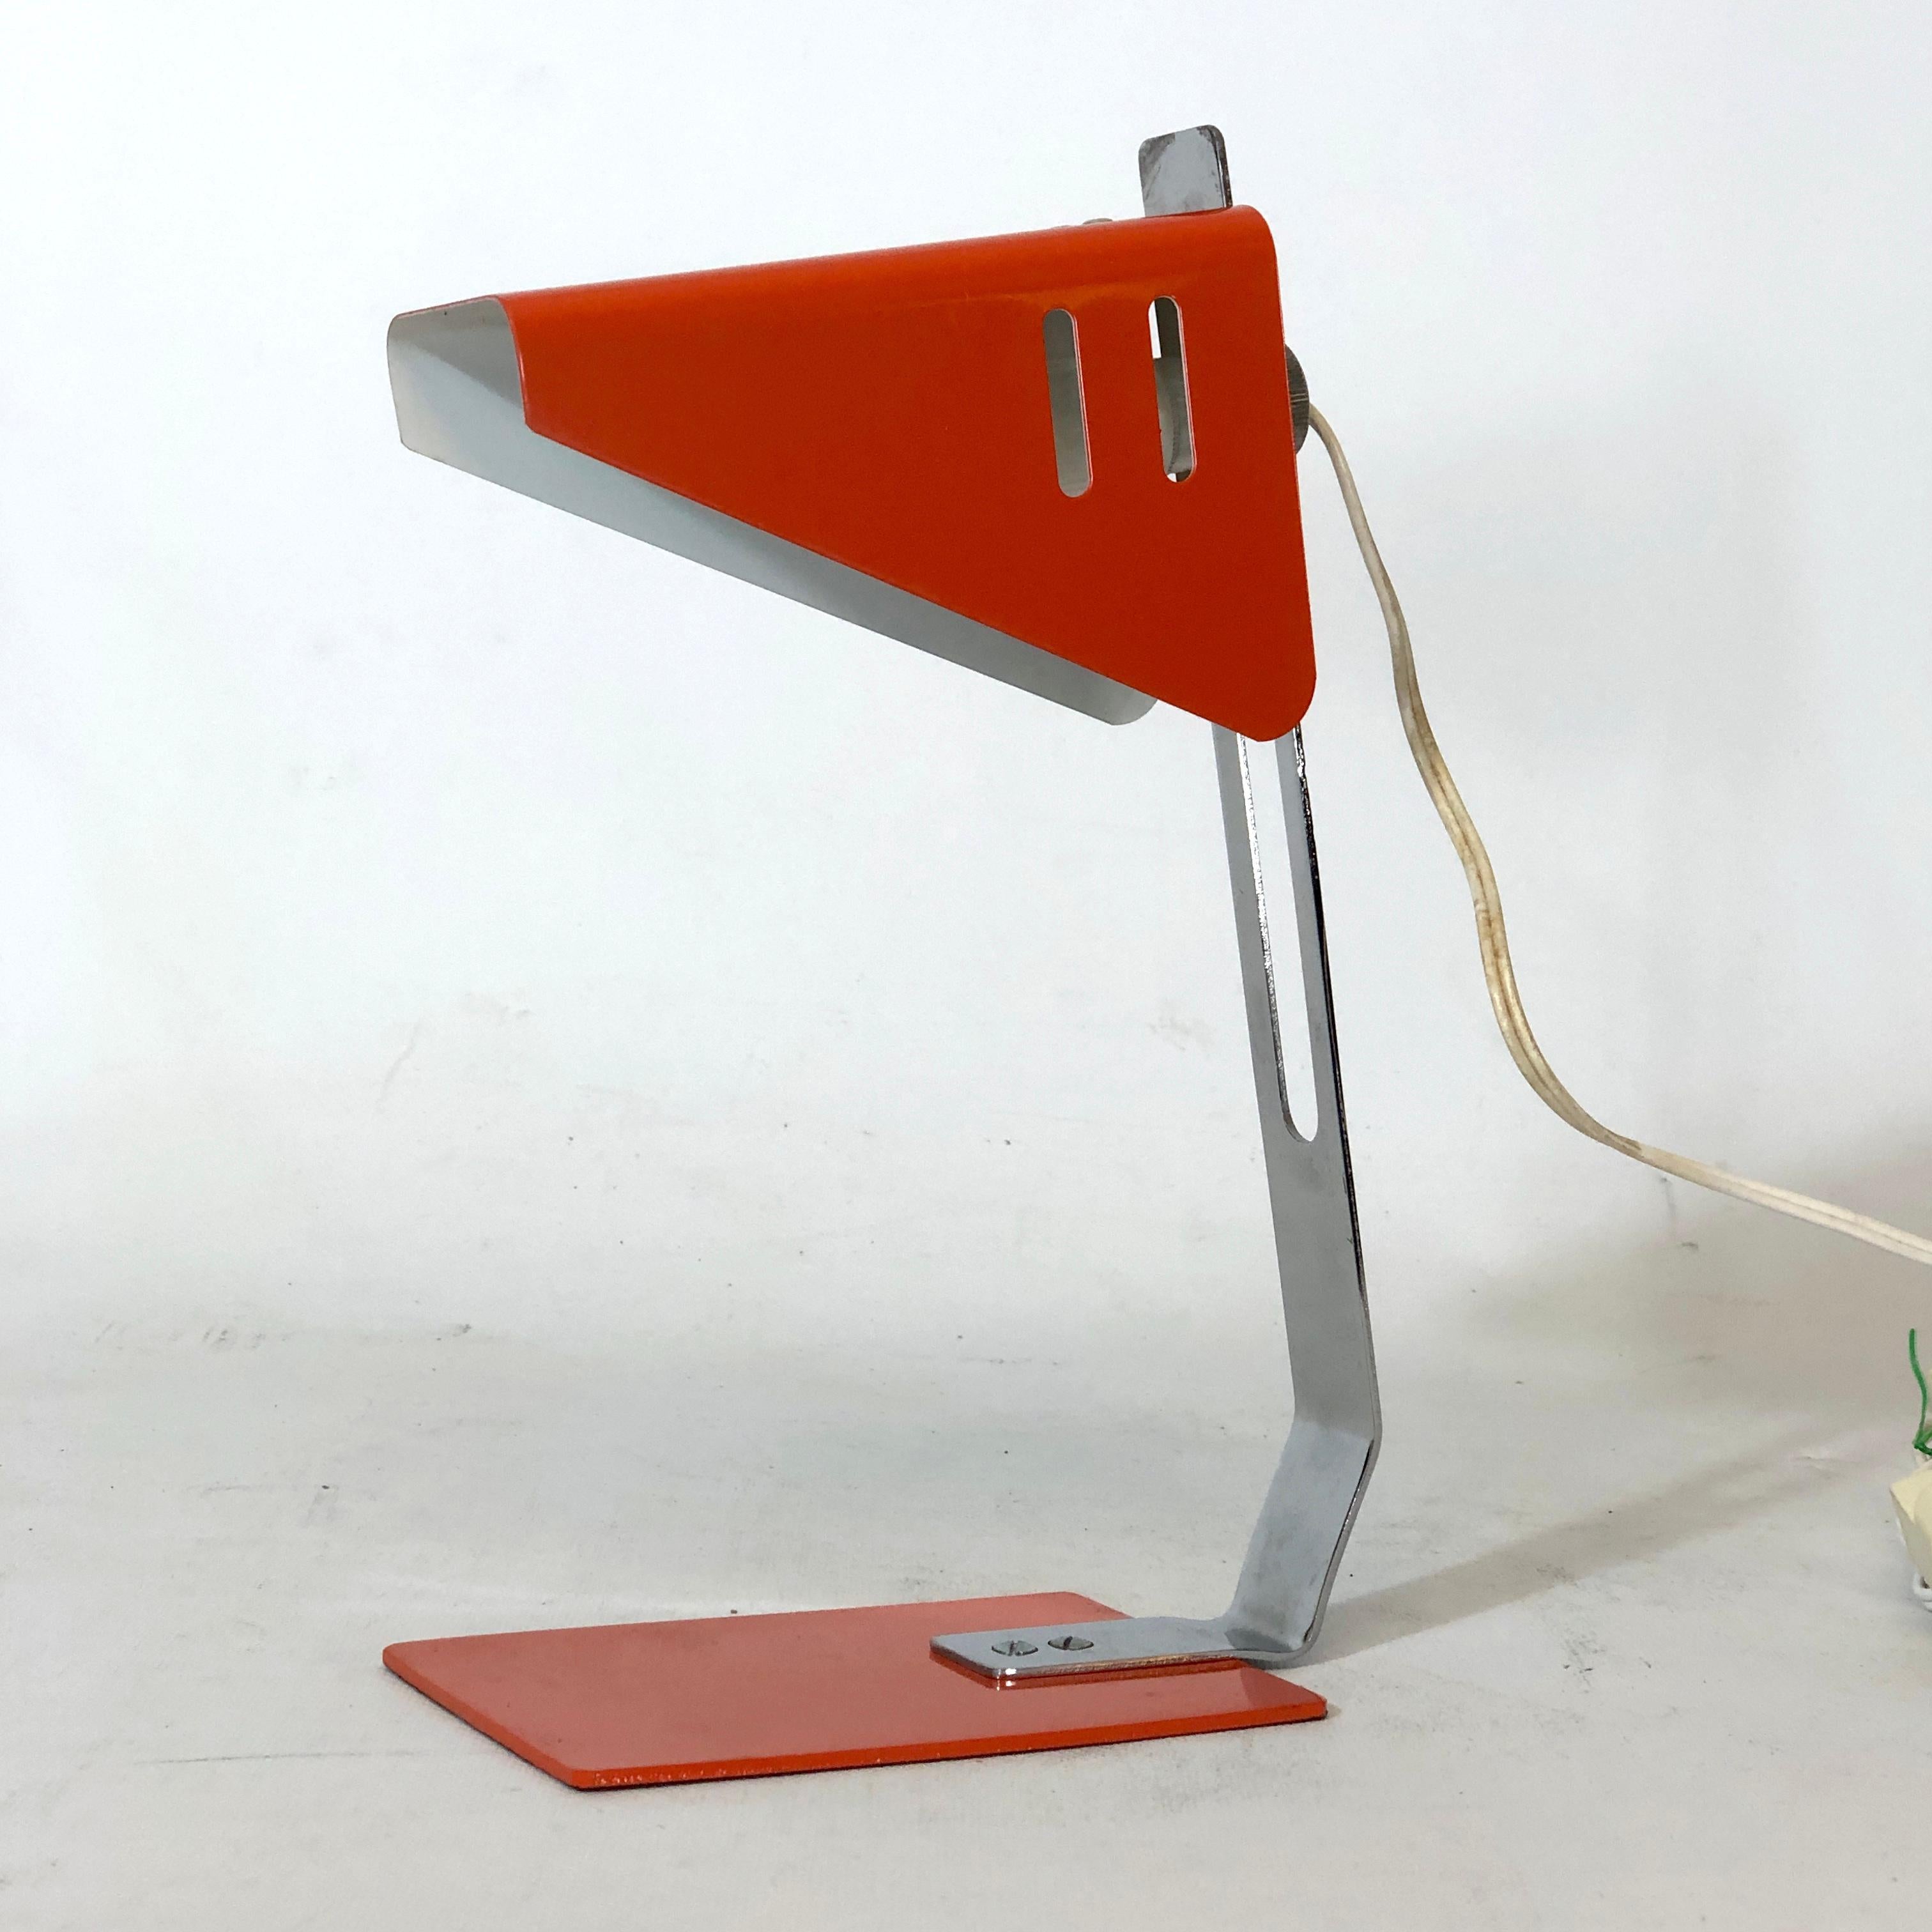 Lacquer Vintage Italian Orange Metal Desk Lamp from 1970s For Sale